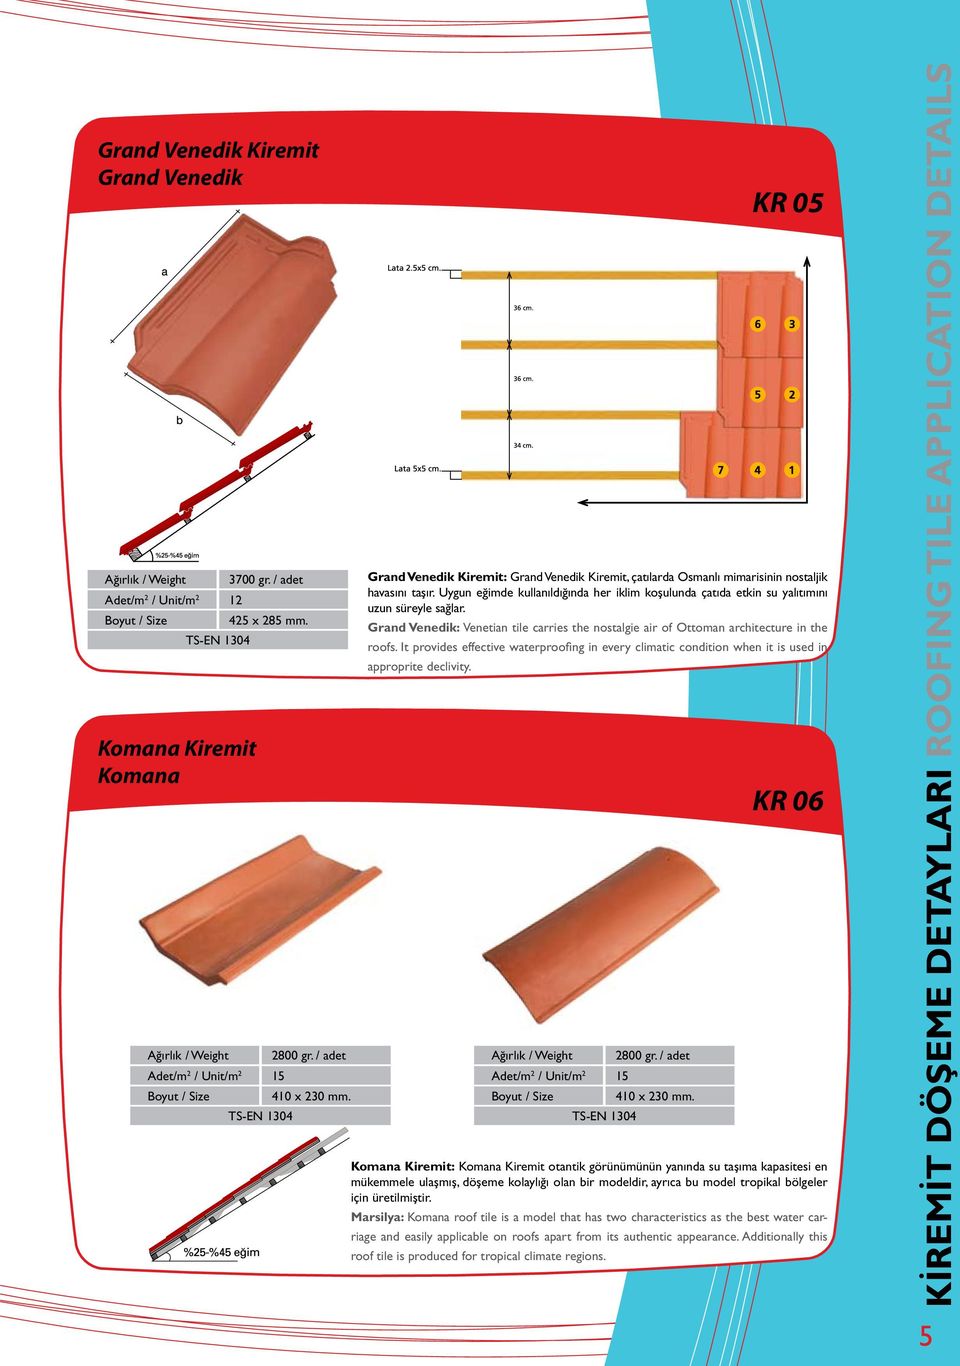 It provides effective waterproofing in every climatic condition when it is used in approprite declivity. Komana Kiremit Komana 2800 gr. / adet 410 x 230 mm.